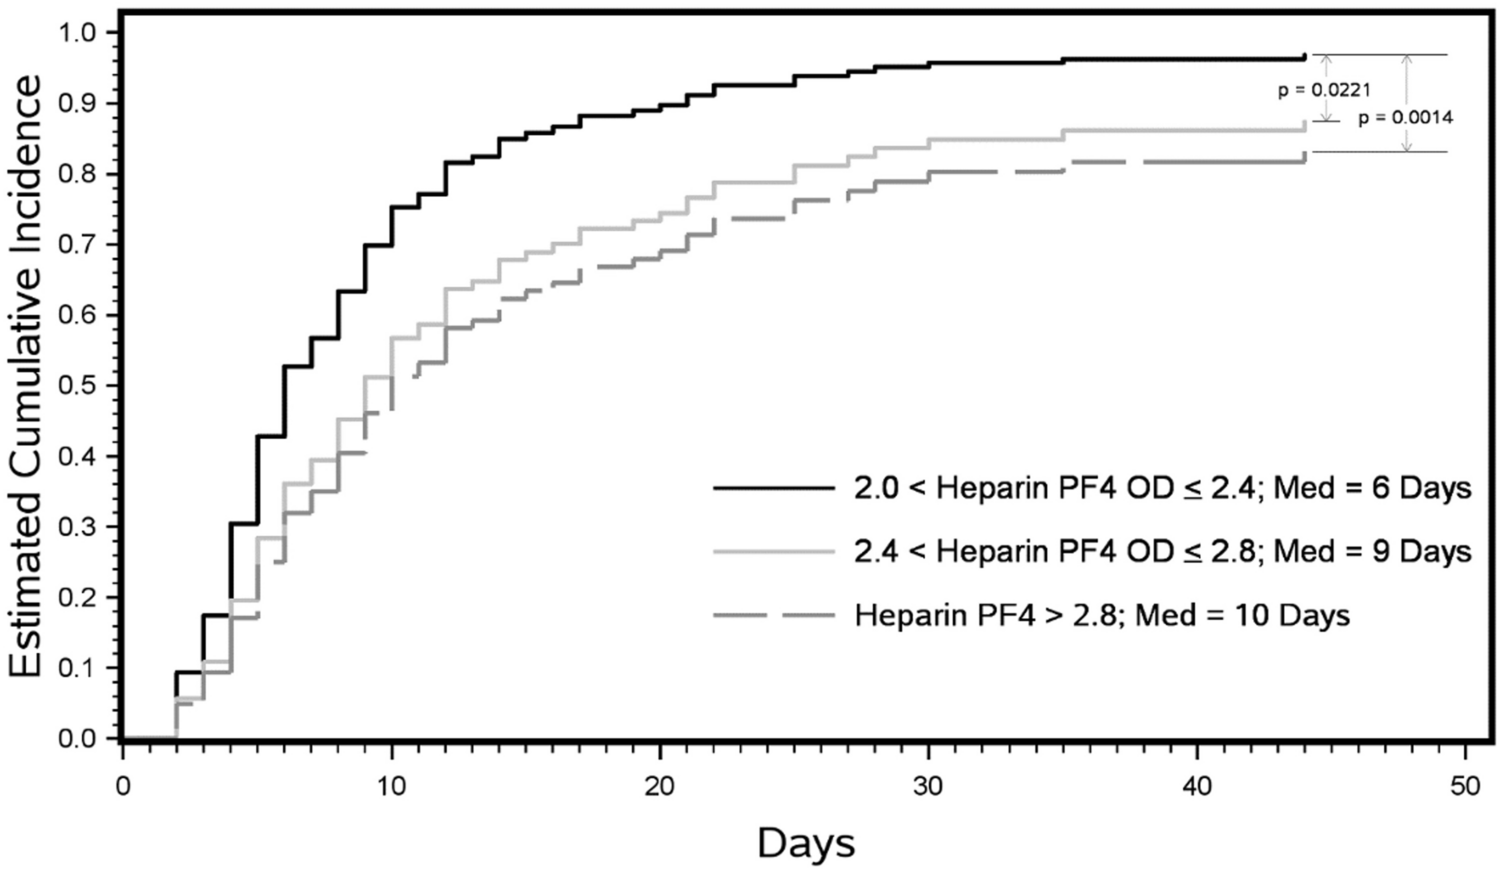 Heparin-induced thrombocytopenia with very high antibody titer is associated with slower platelet recovery and higher risk of thrombosis